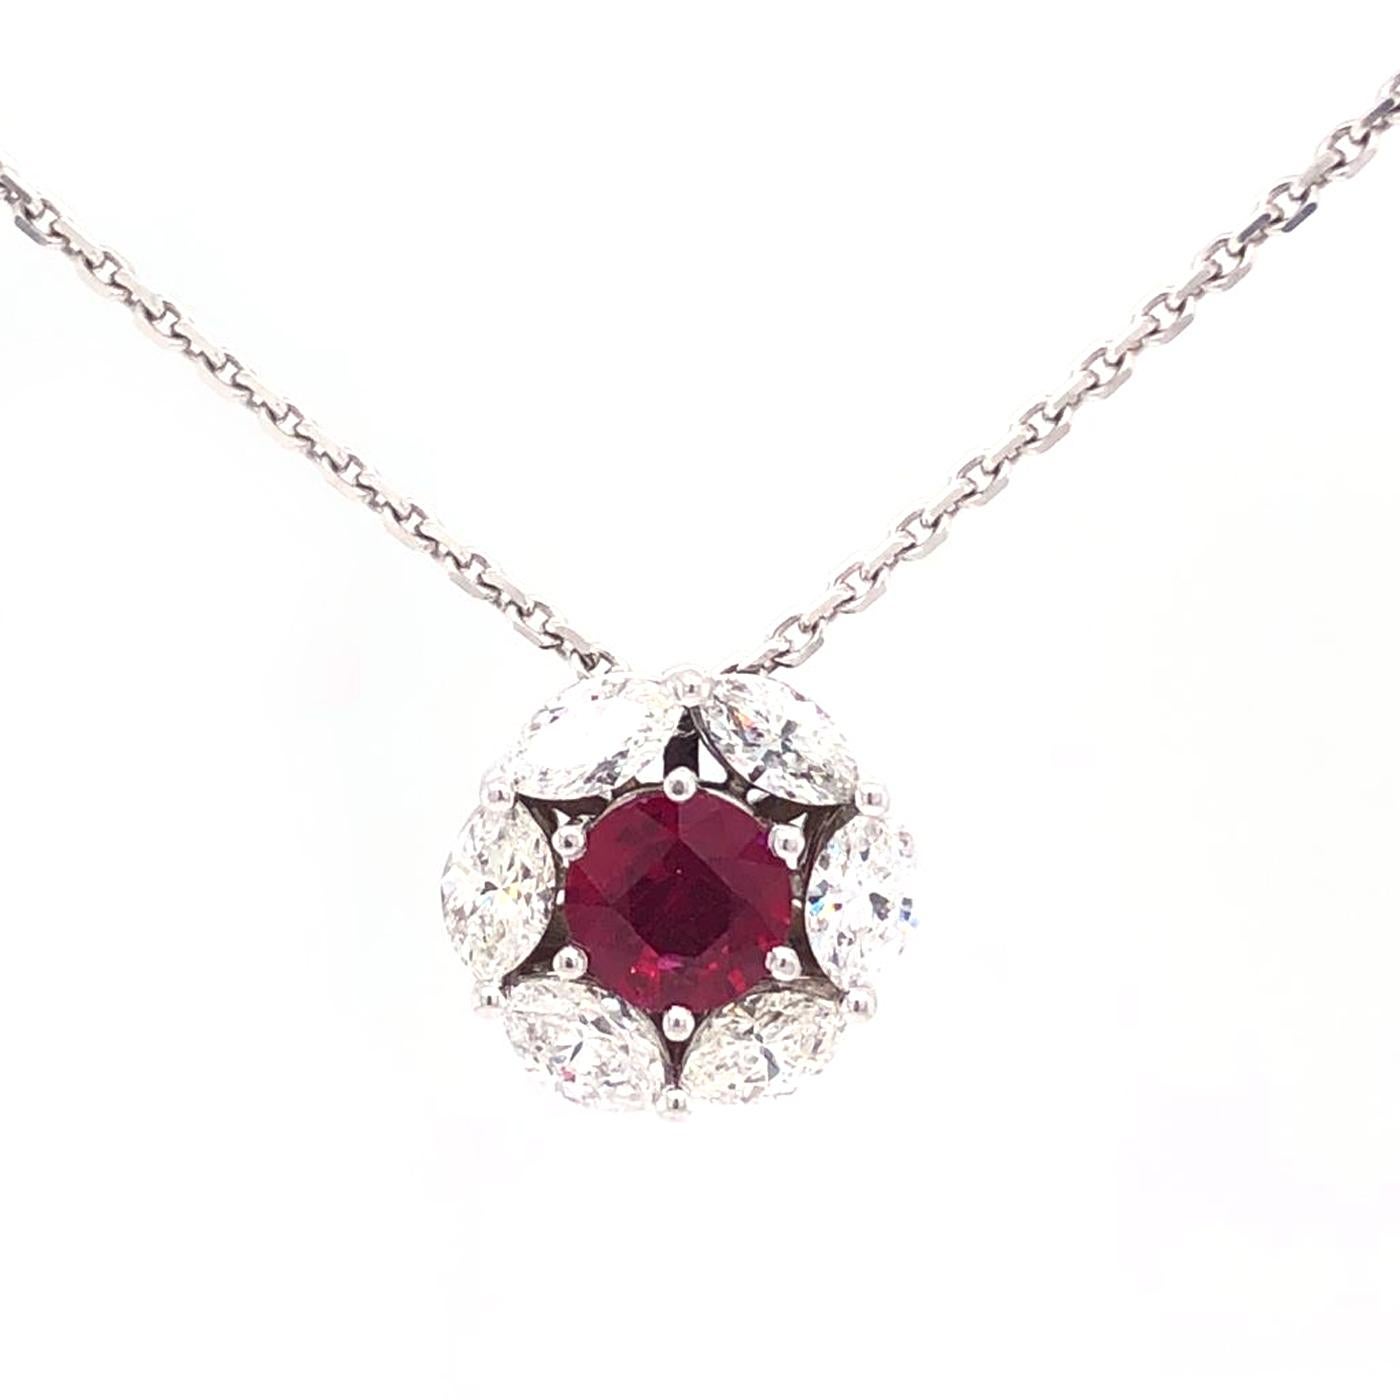 18K White Gold Burma Diamond Shaped Pendant/Necklace. Wear this versatile pendant for some chic sparkle and an unusual mixing of fancy shapes. Non-Heat Burma Red Ruby Diamond Pendant with 1.5tcw weight Marquise total 6 stones 0.25ct each E-F Color